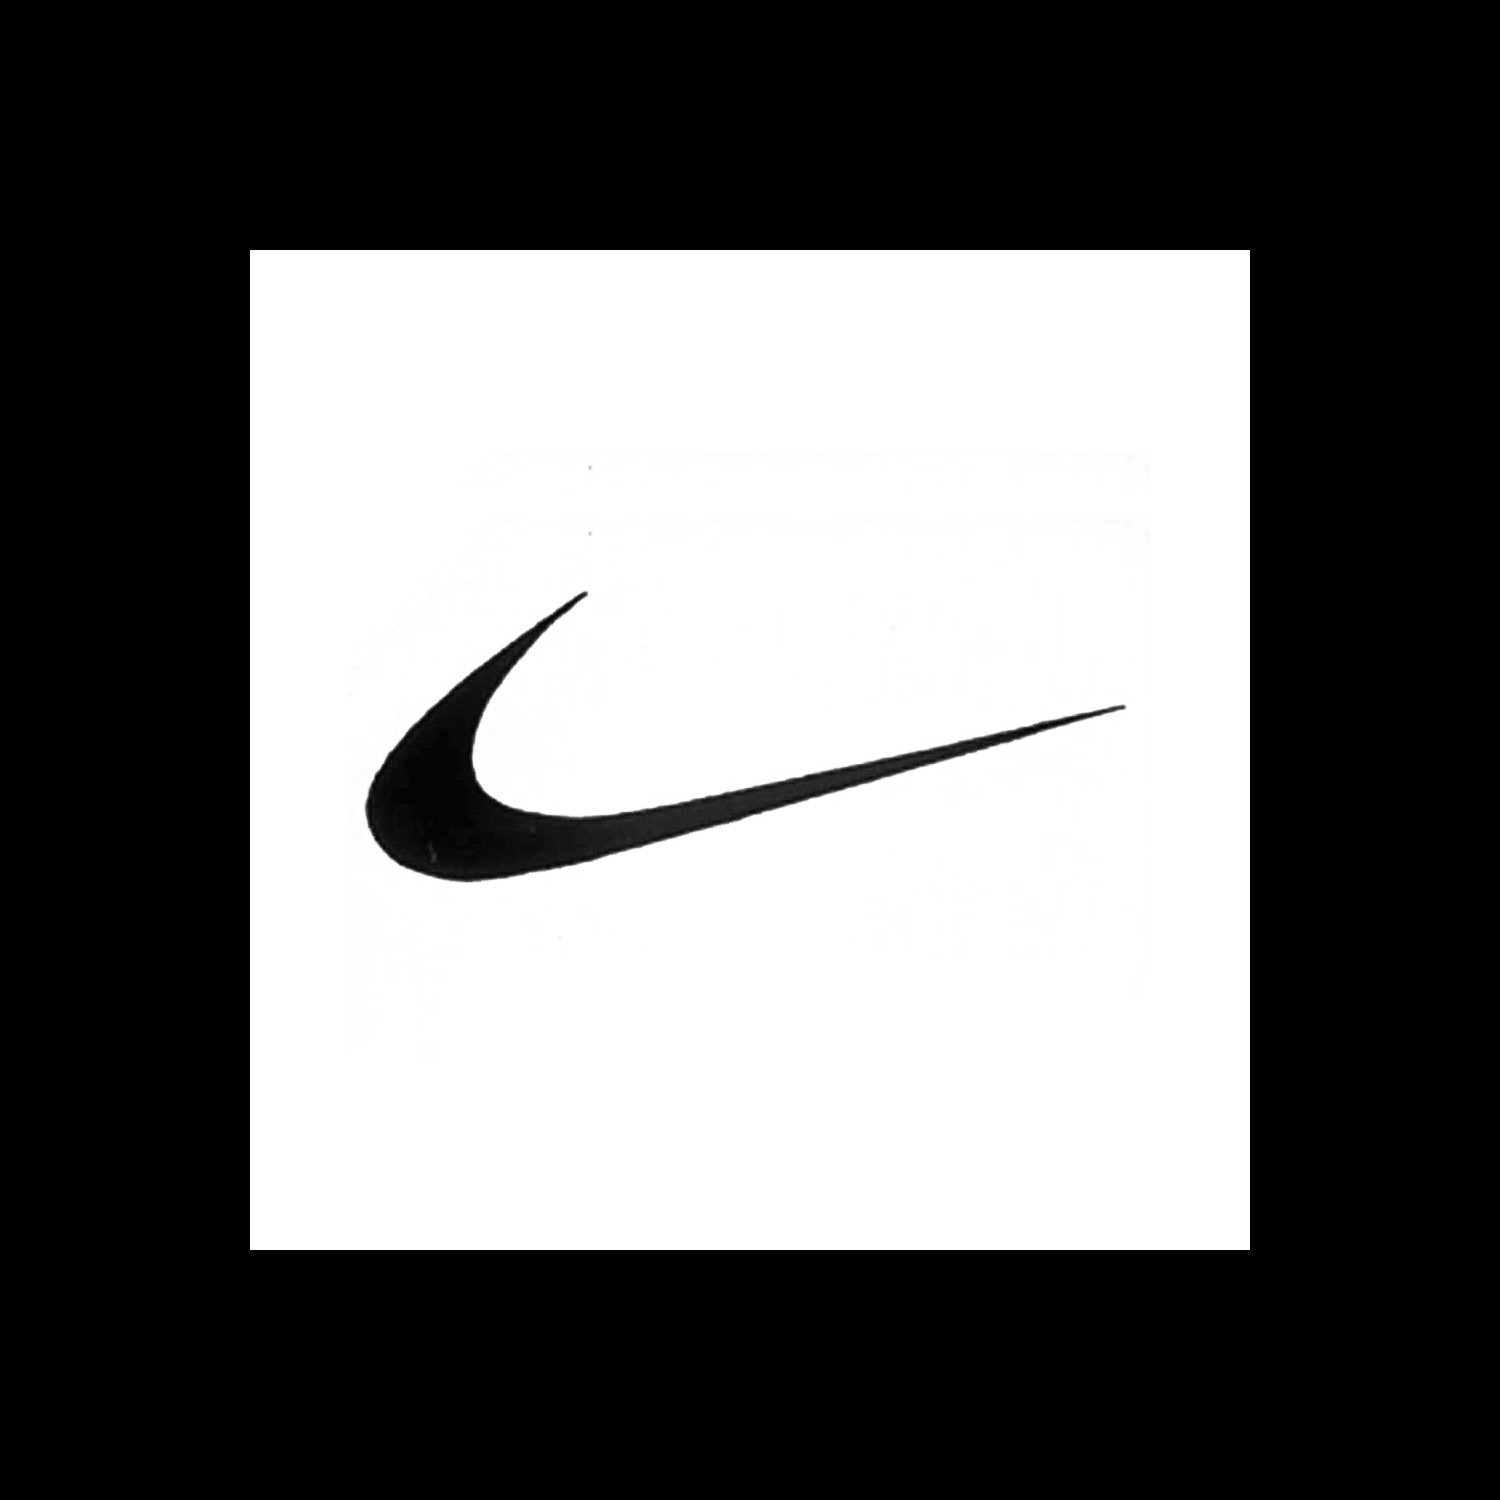 Did you know that Nike's iconic “Swoosh” logo was designed by a